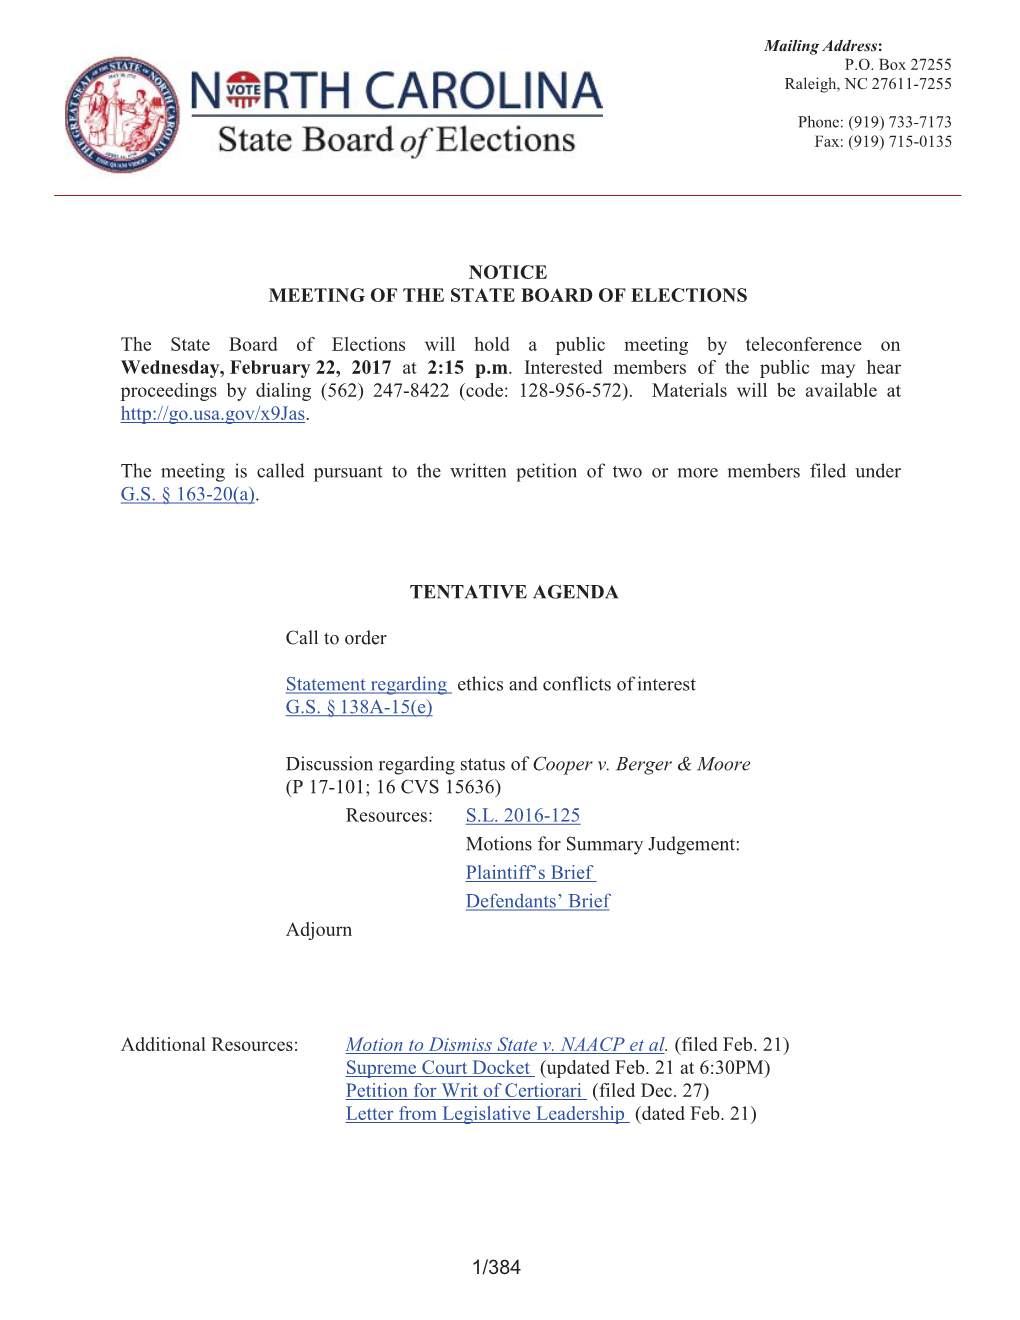 NOTICE MEETING of the STATE BOARD of ELECTIONS the State